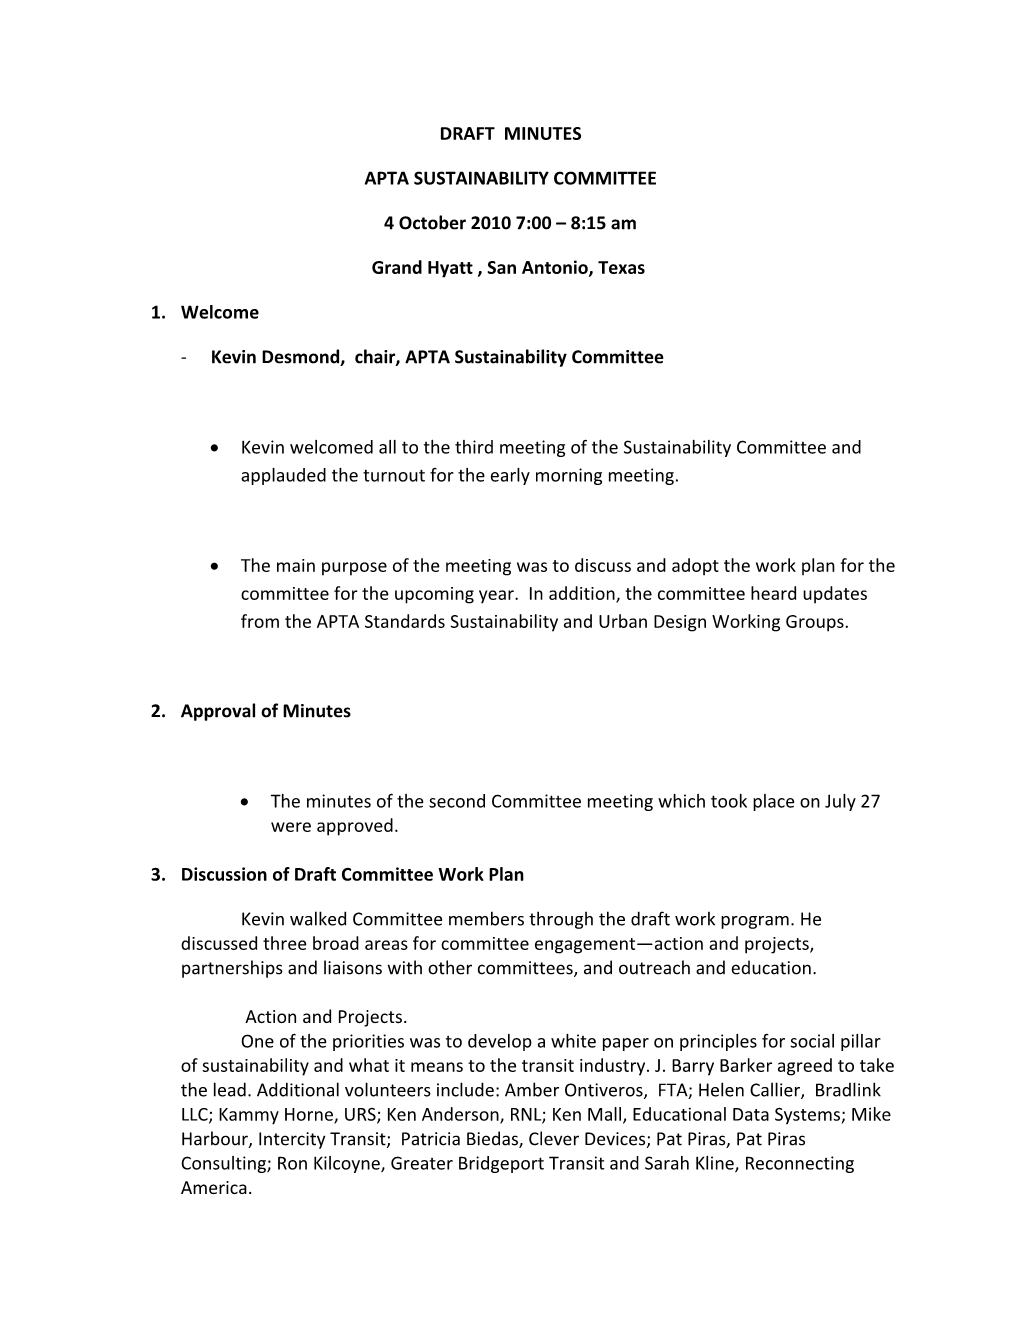 Sustainability-Committee-Minutes-October-2010